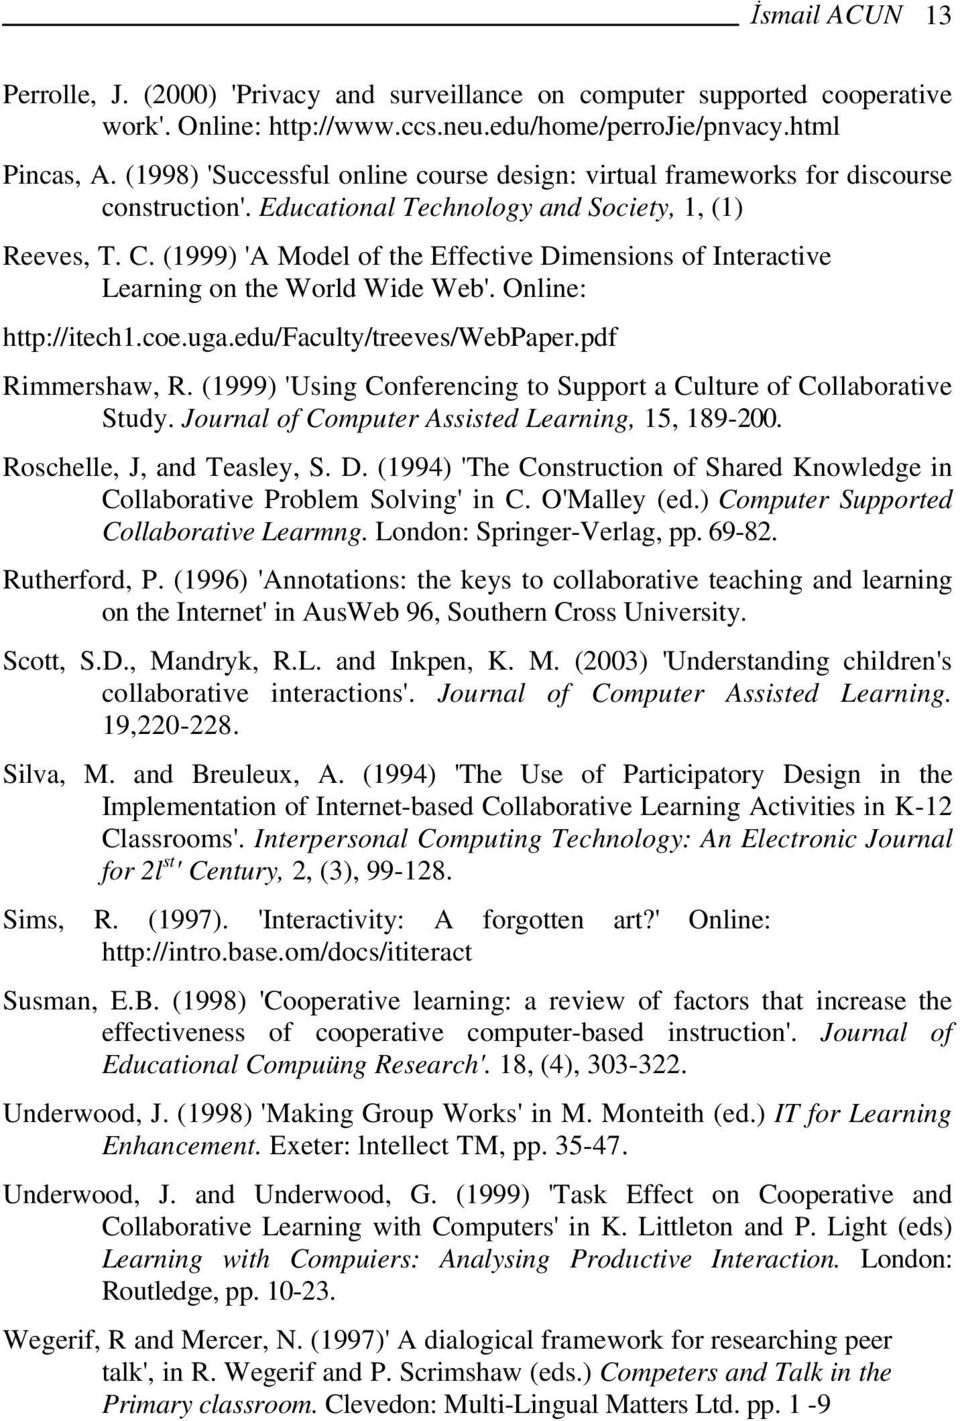 (1999) 'A Model of the Effective Dimensions of Interactive Learning on the World Wide Web'. Online: http://itech1.coe.uga.edu/faculty/treeves/webpaper.pdf Rimmershaw, R.